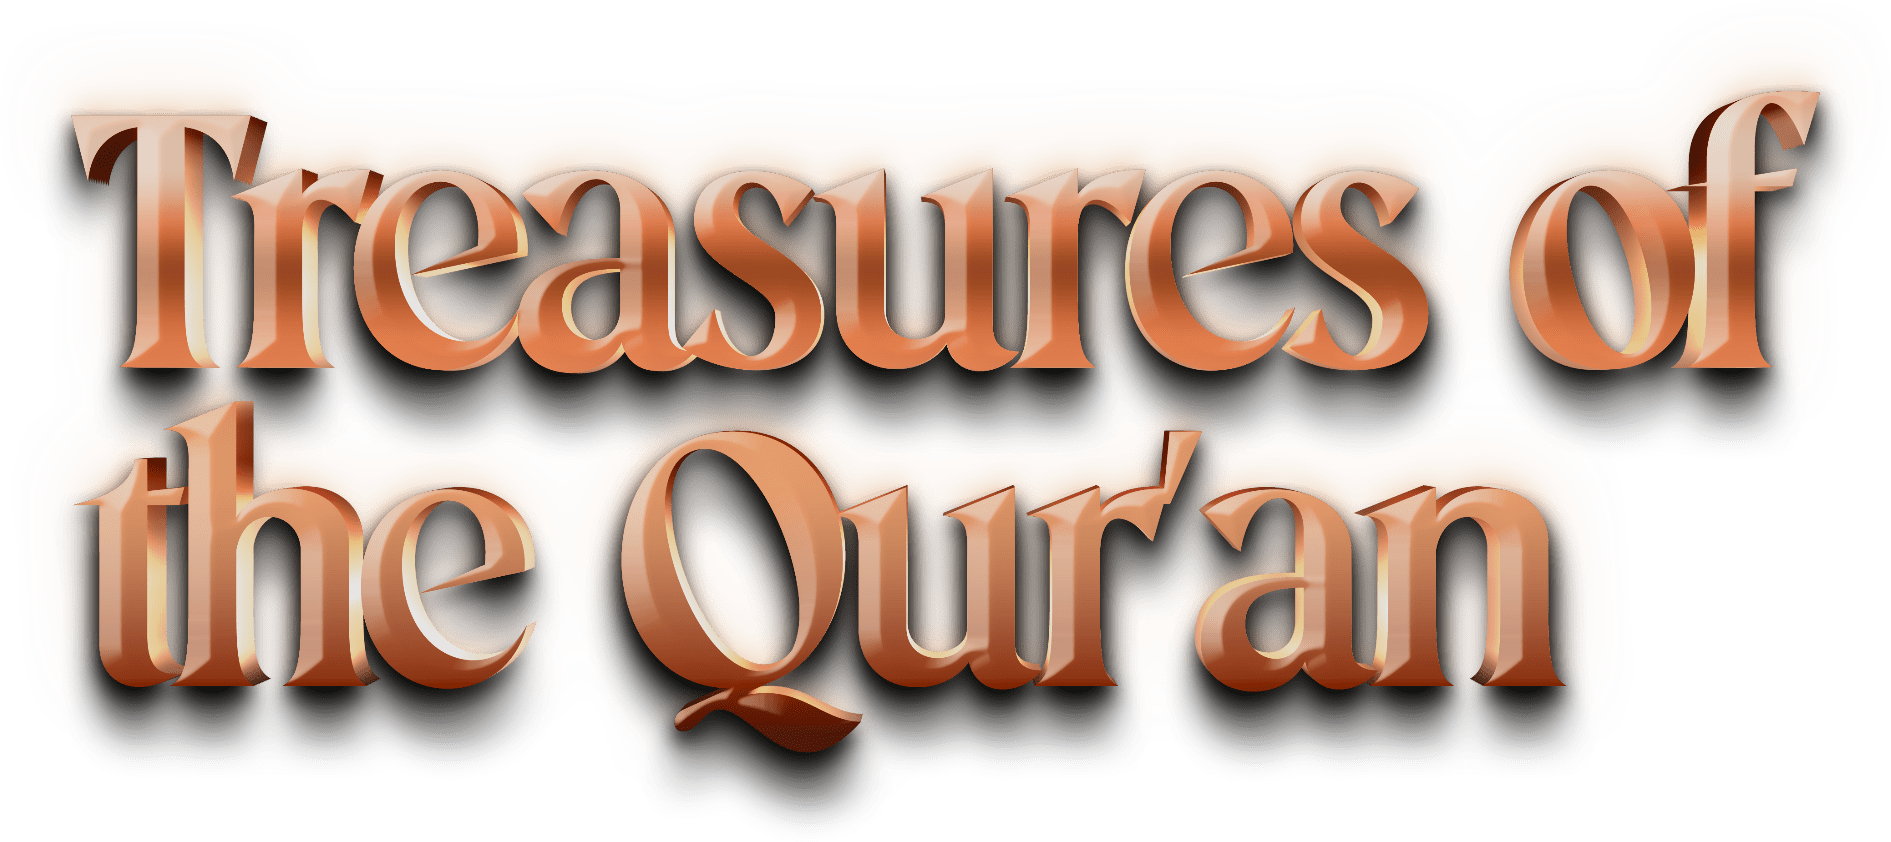 Treasures of the Qur'an Conference Header